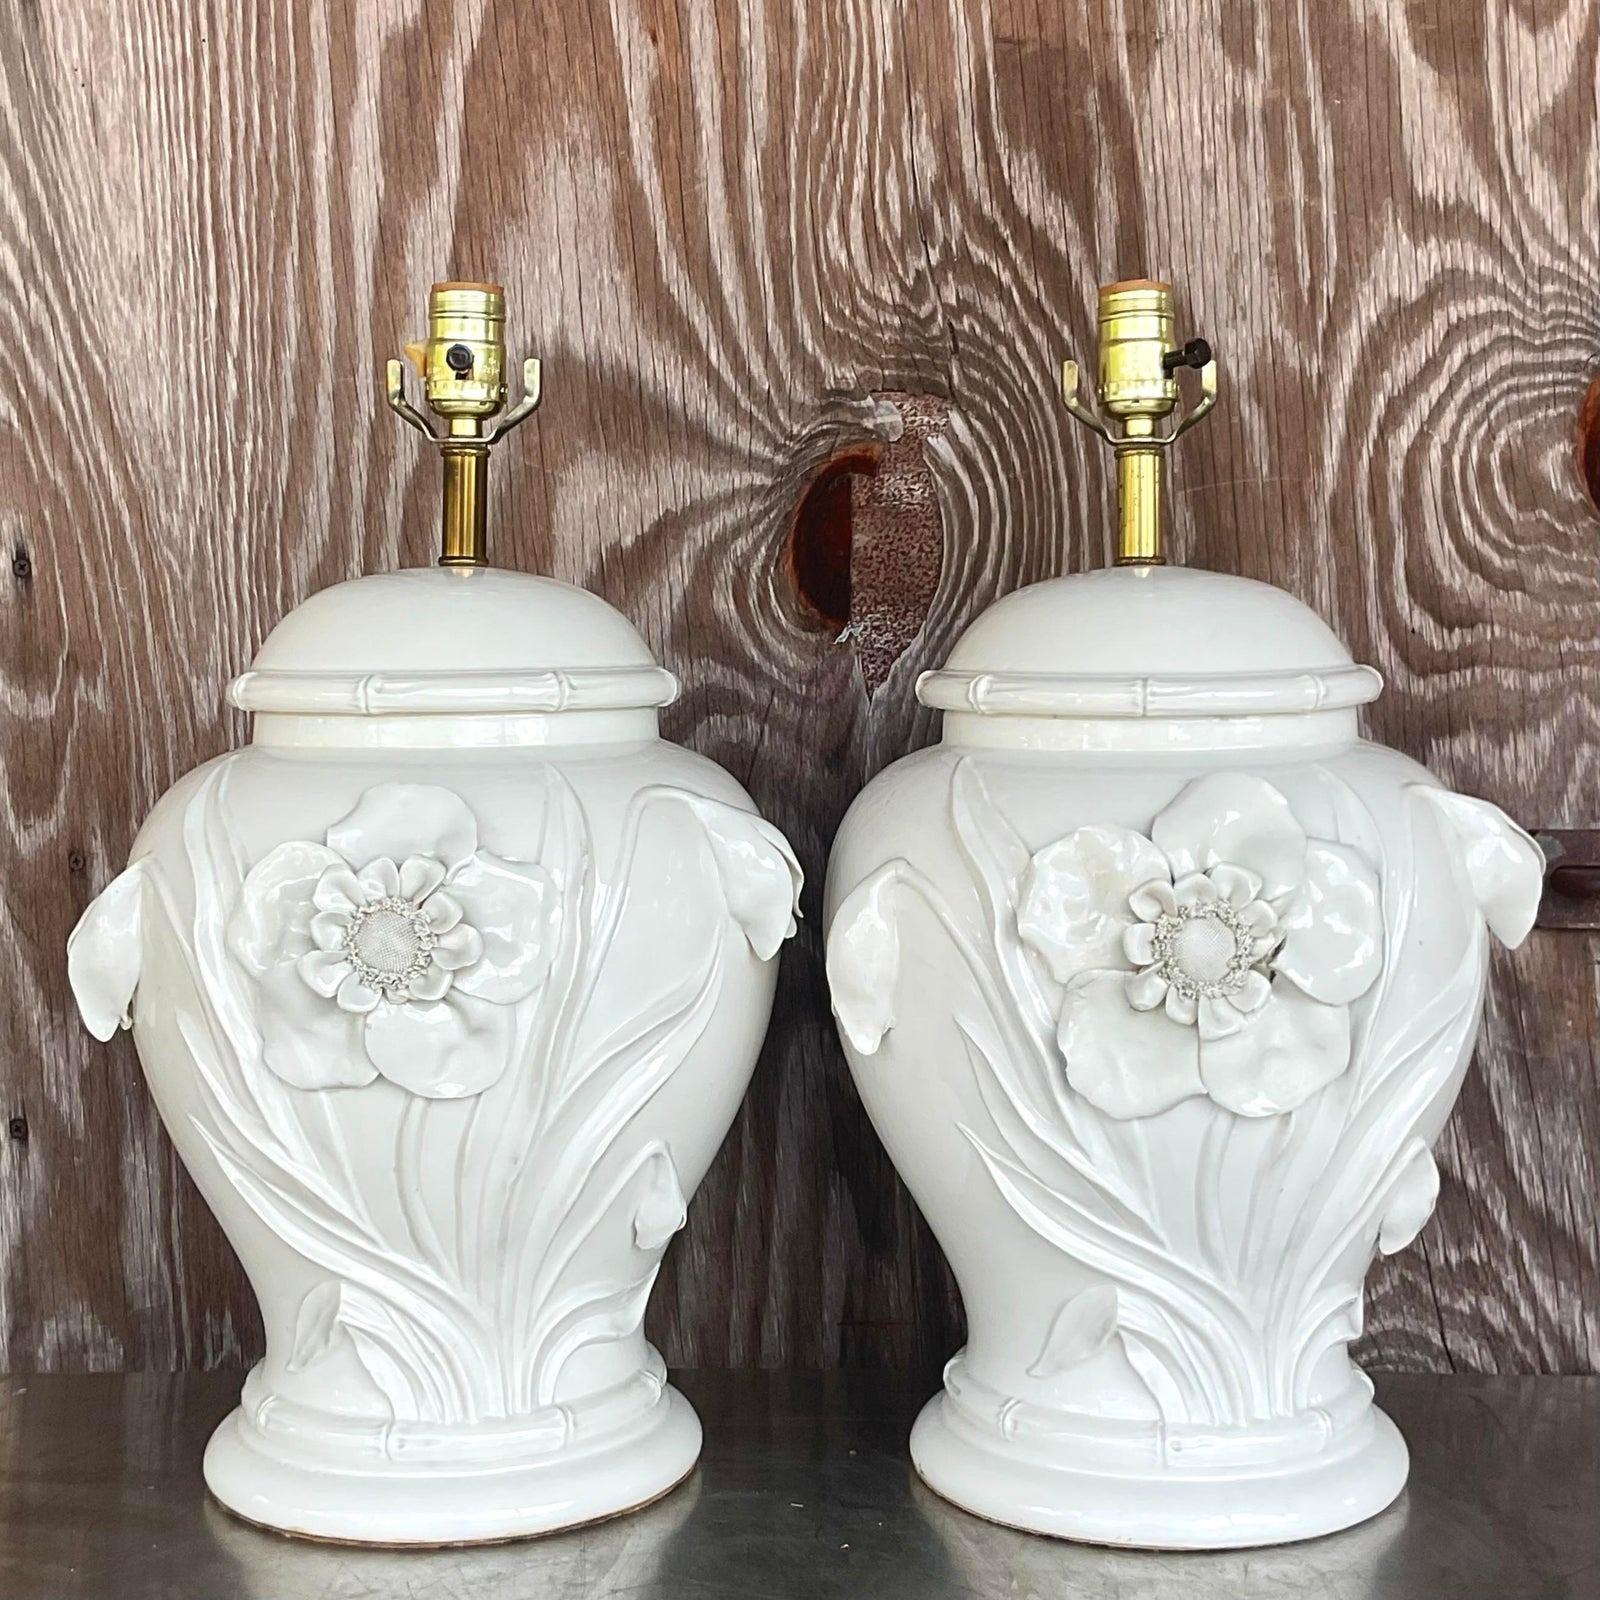 A striking pair of vintage Boho table lamps. Chic hand built flowers on a ginger jar shape. An off white glazed ceramic finish. Acquired from a Palm Beach estate